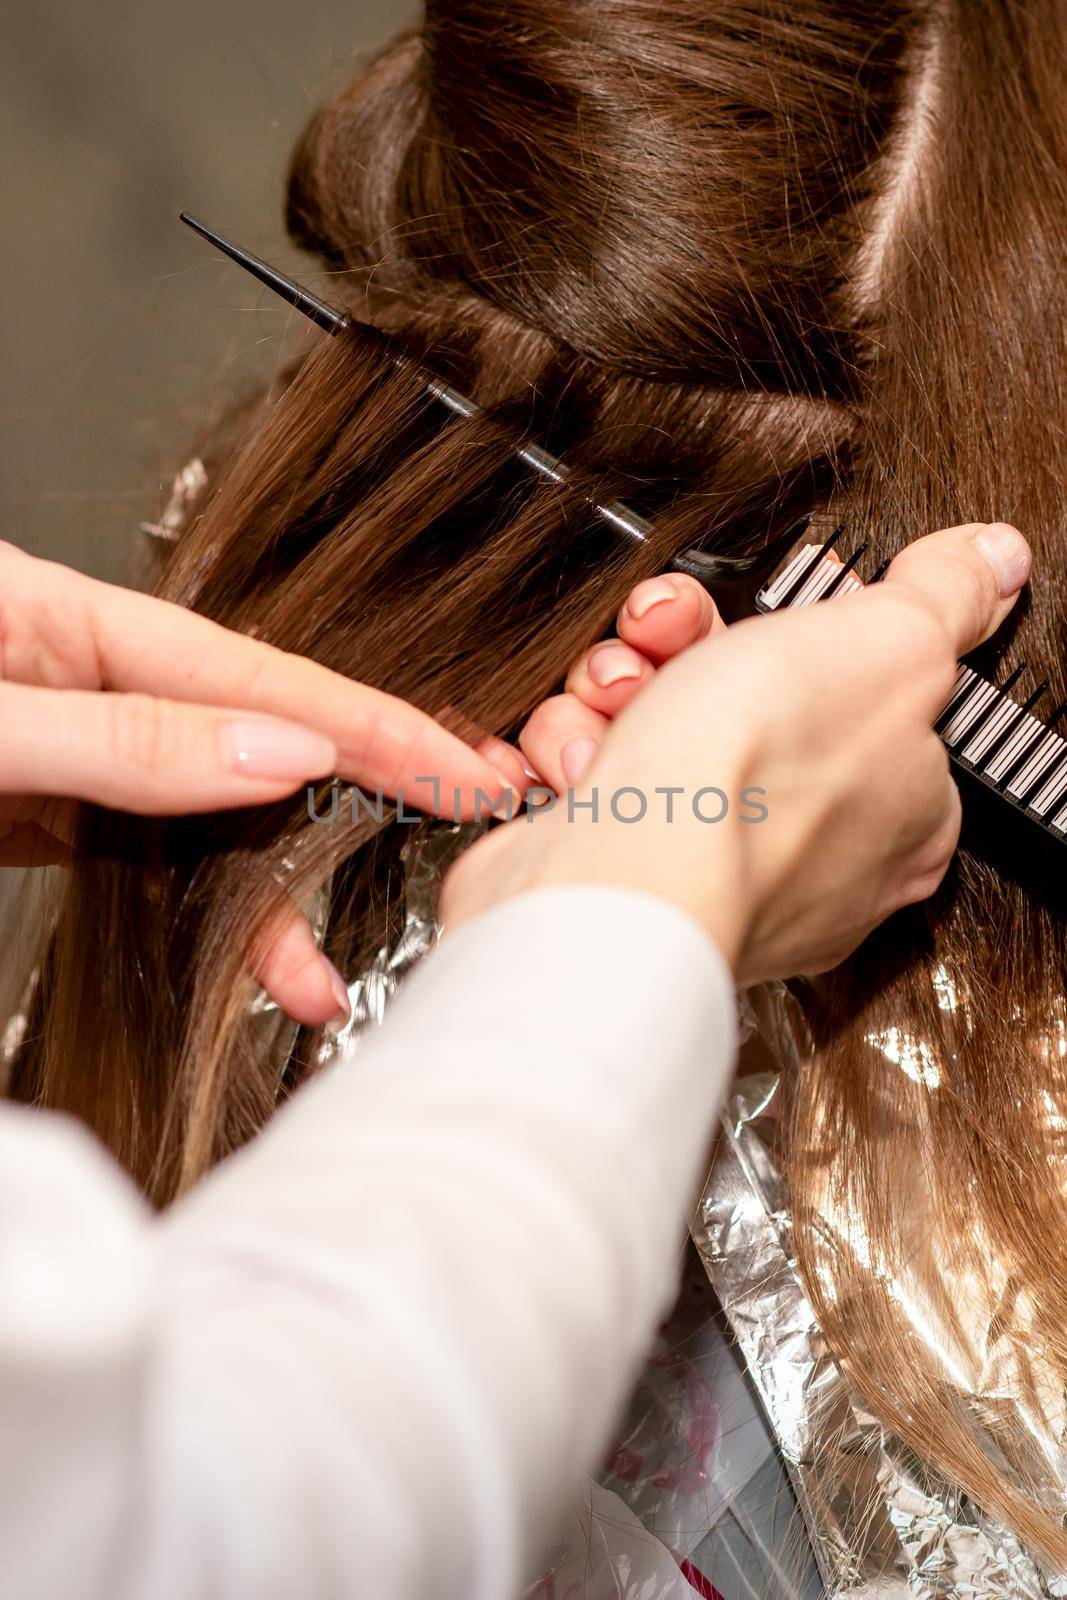 Hairdresser's hands prepare brown hair for dyeing with a comb and foil in a beauty salon, close up. by okskukuruza